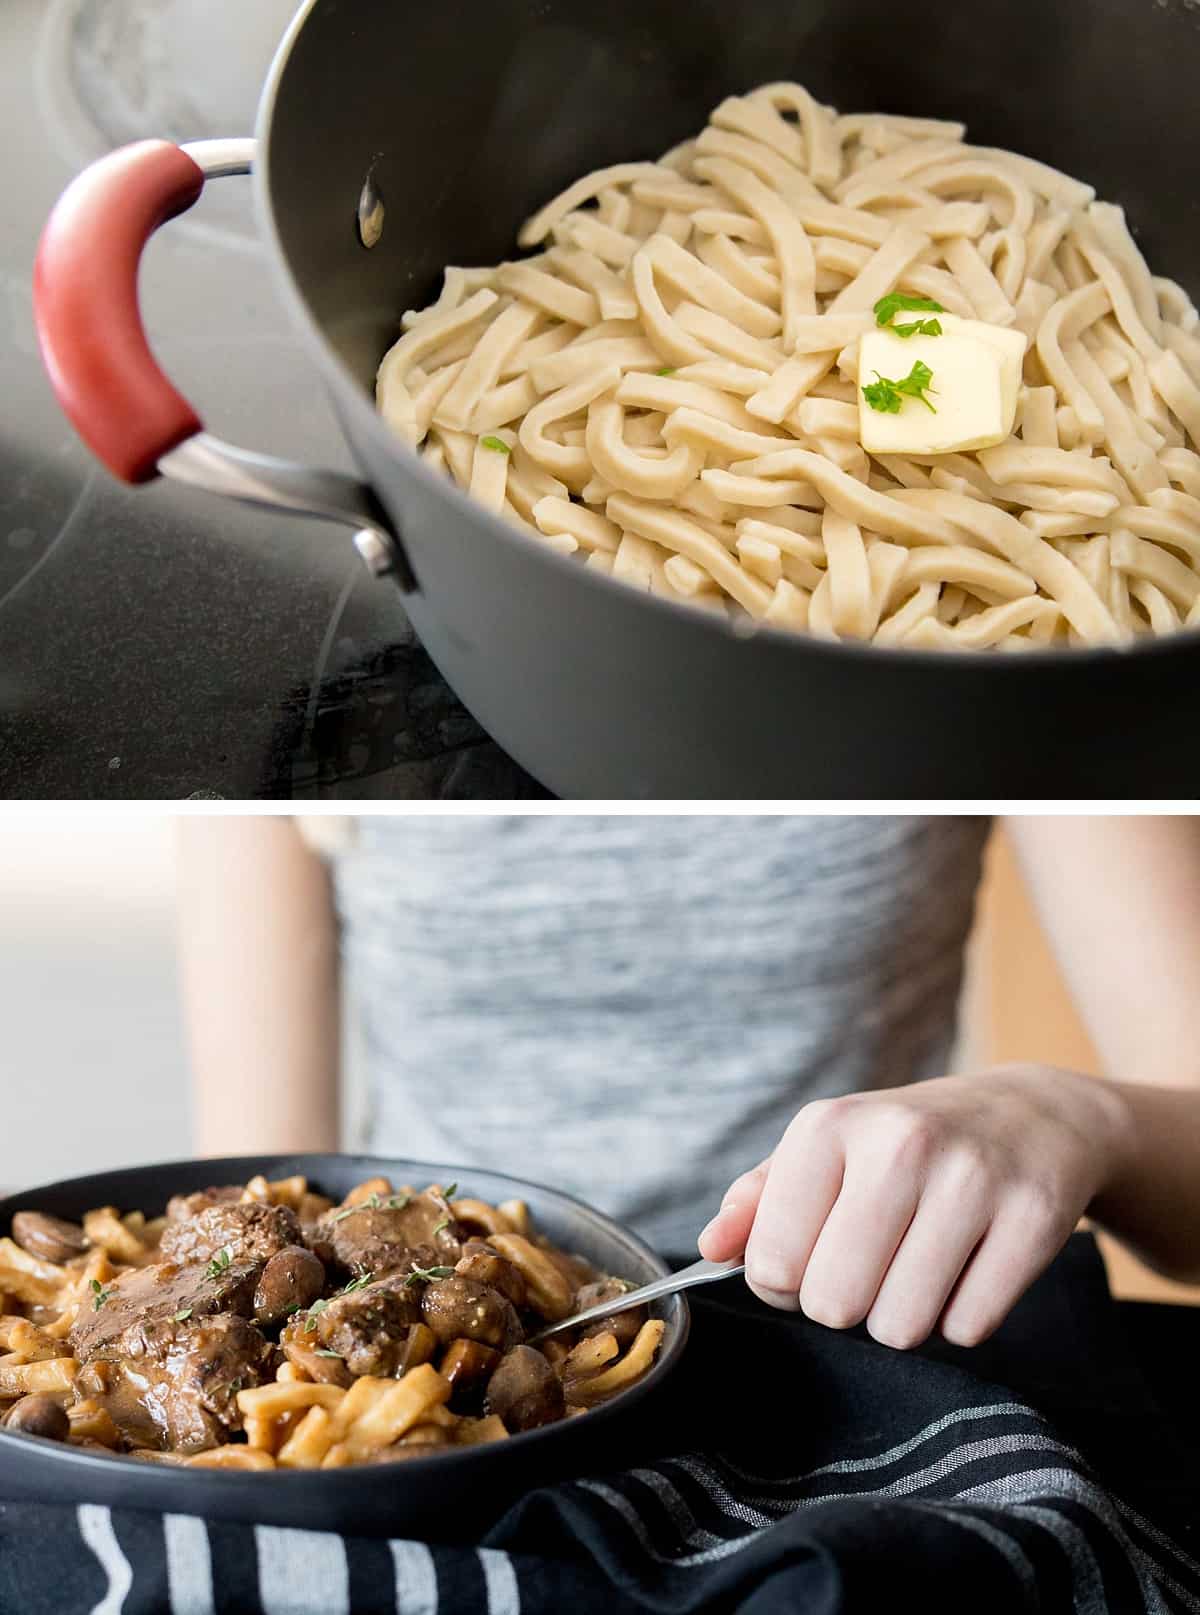 This slow cooker stroganoff is so simple and DELICIOUS, perfect for a chilly day. Just pop it in the crock pot and come home to a delicious family meal. #recipe #homemadegoodness #slowcooker #crockpot *My family loves Beef Stroganoff. These thick egg noodles are the best!